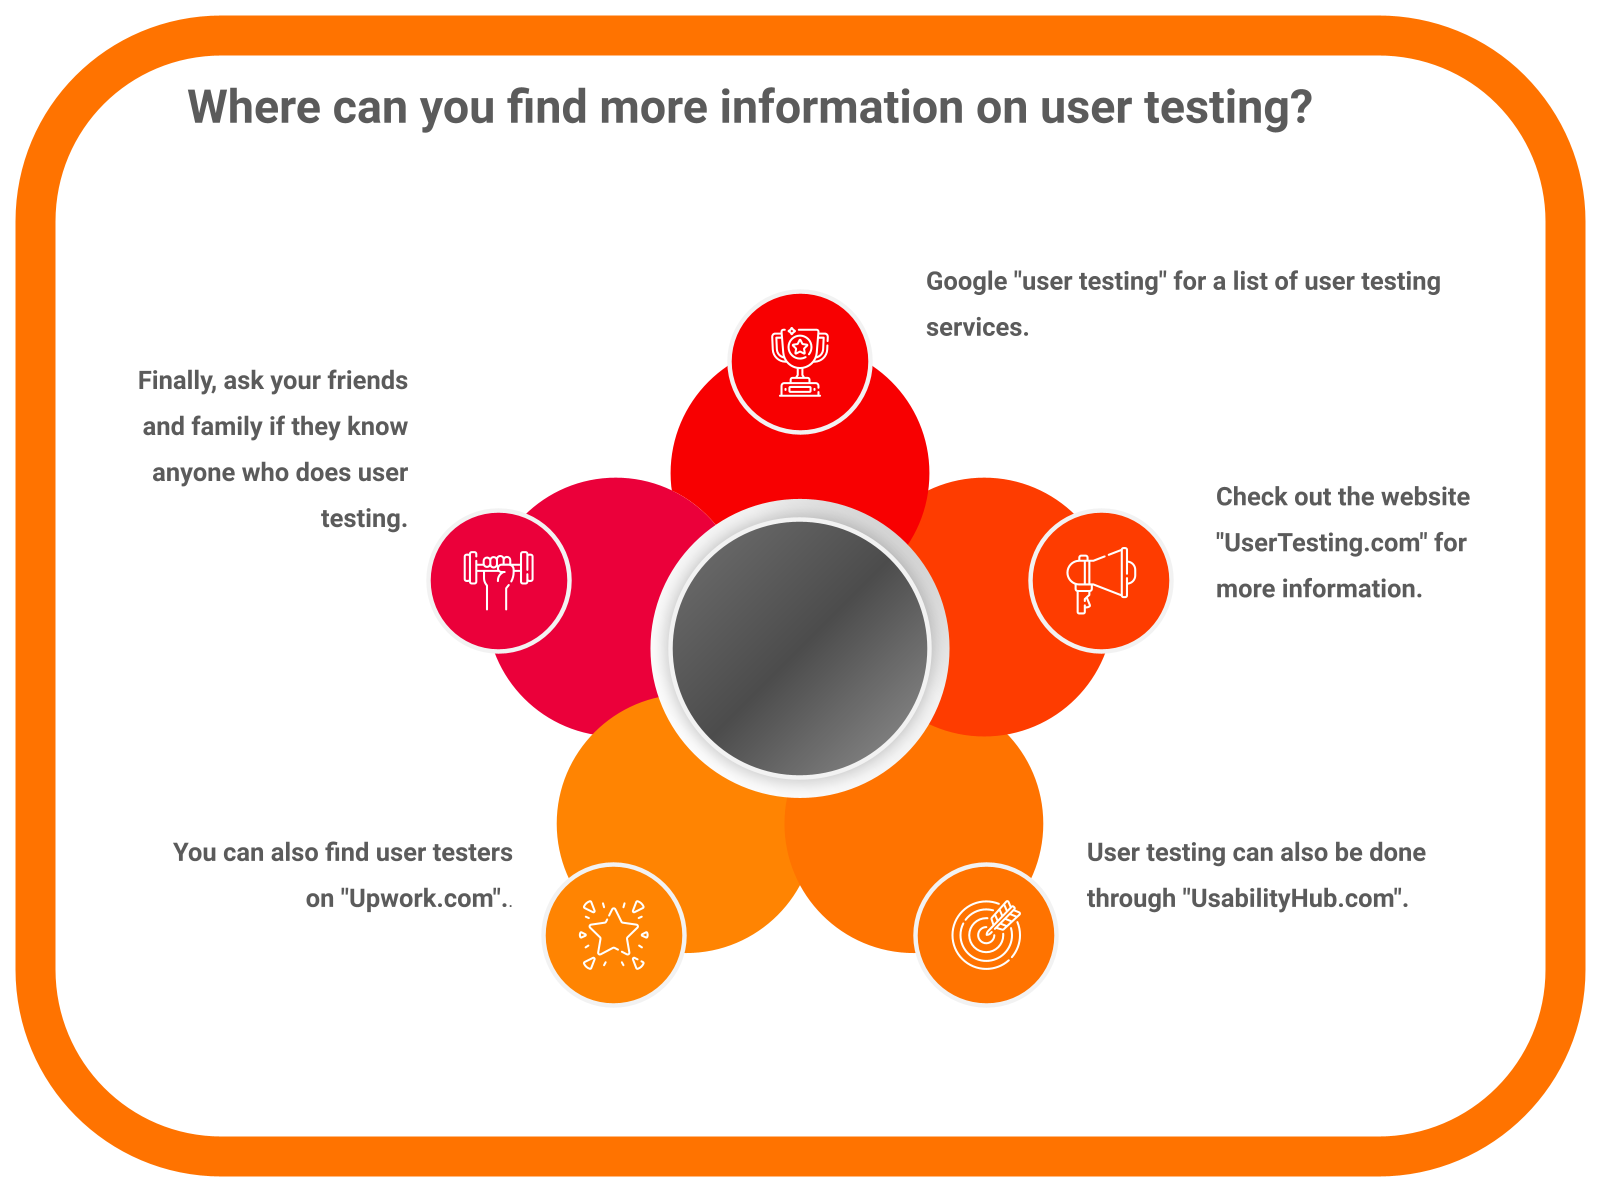 Where can you find more information on user testing?